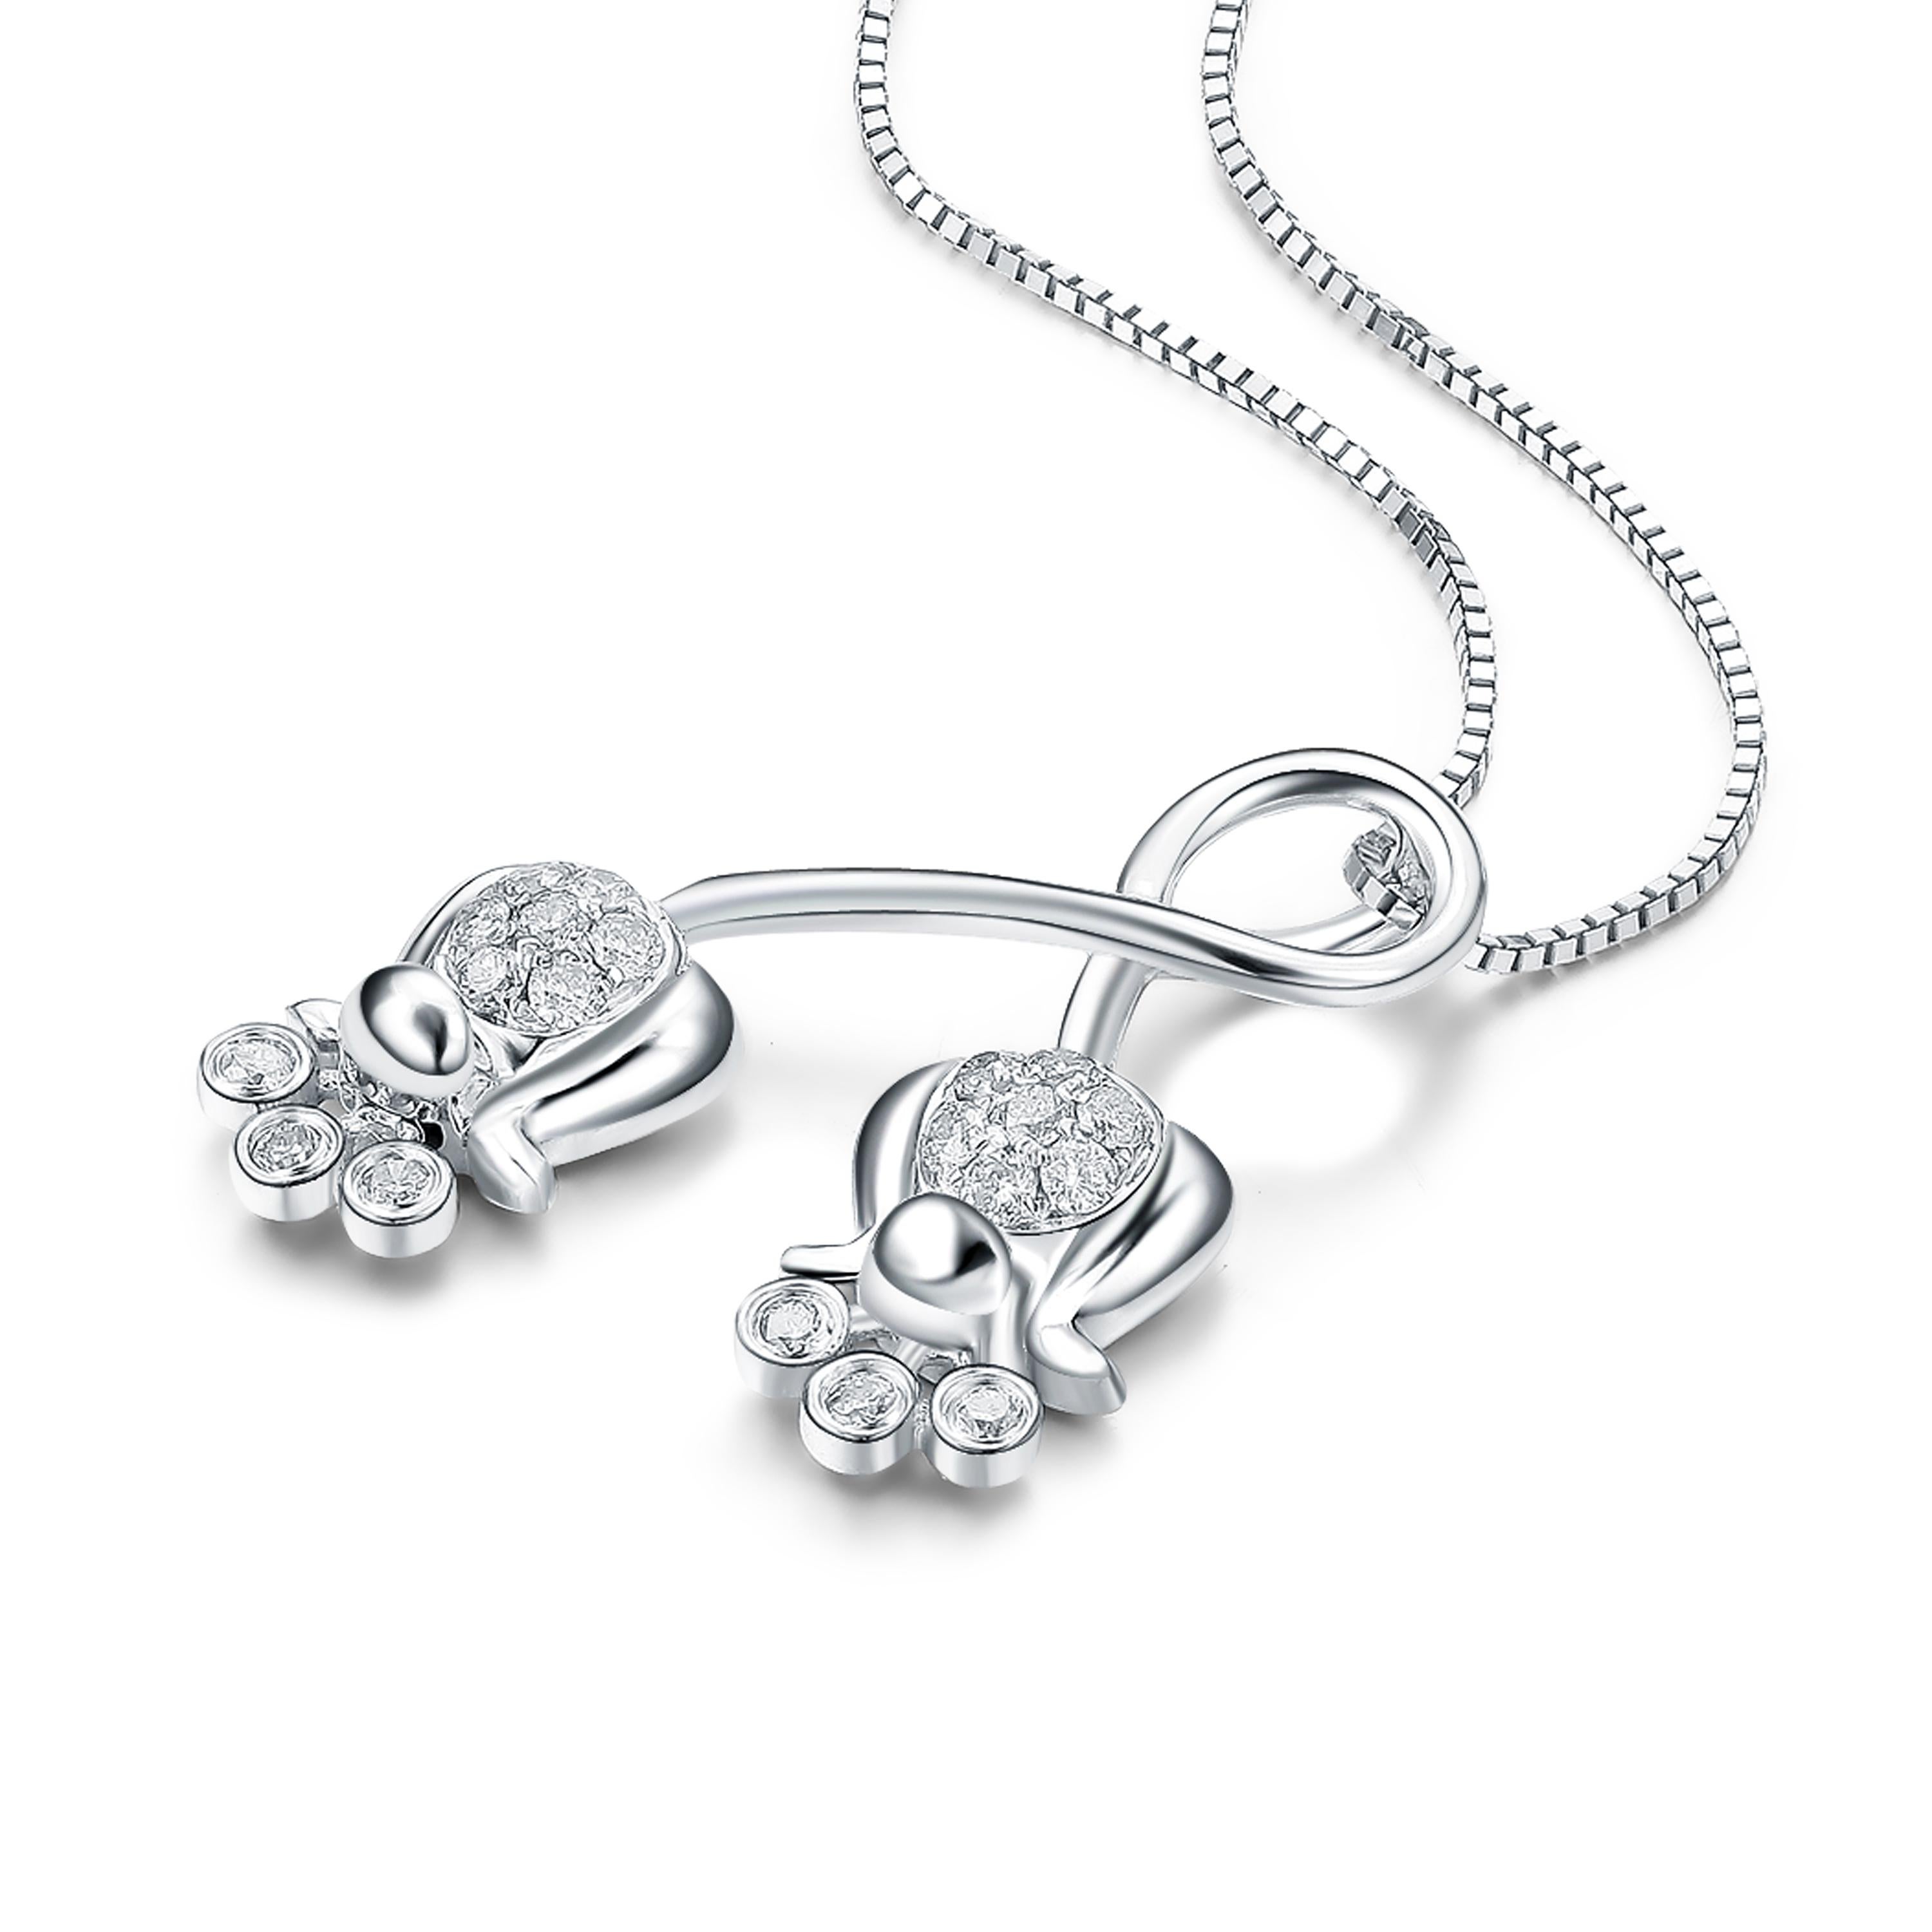 Description:
Lily of the Valley double pendant with 0.185ct white diamonds, set in 9ct white gold with a high polish. Chain length is 16 inches + 2 inch extension.

Inspiration:
The lily of the valley flower is one of the most beloved, opulent